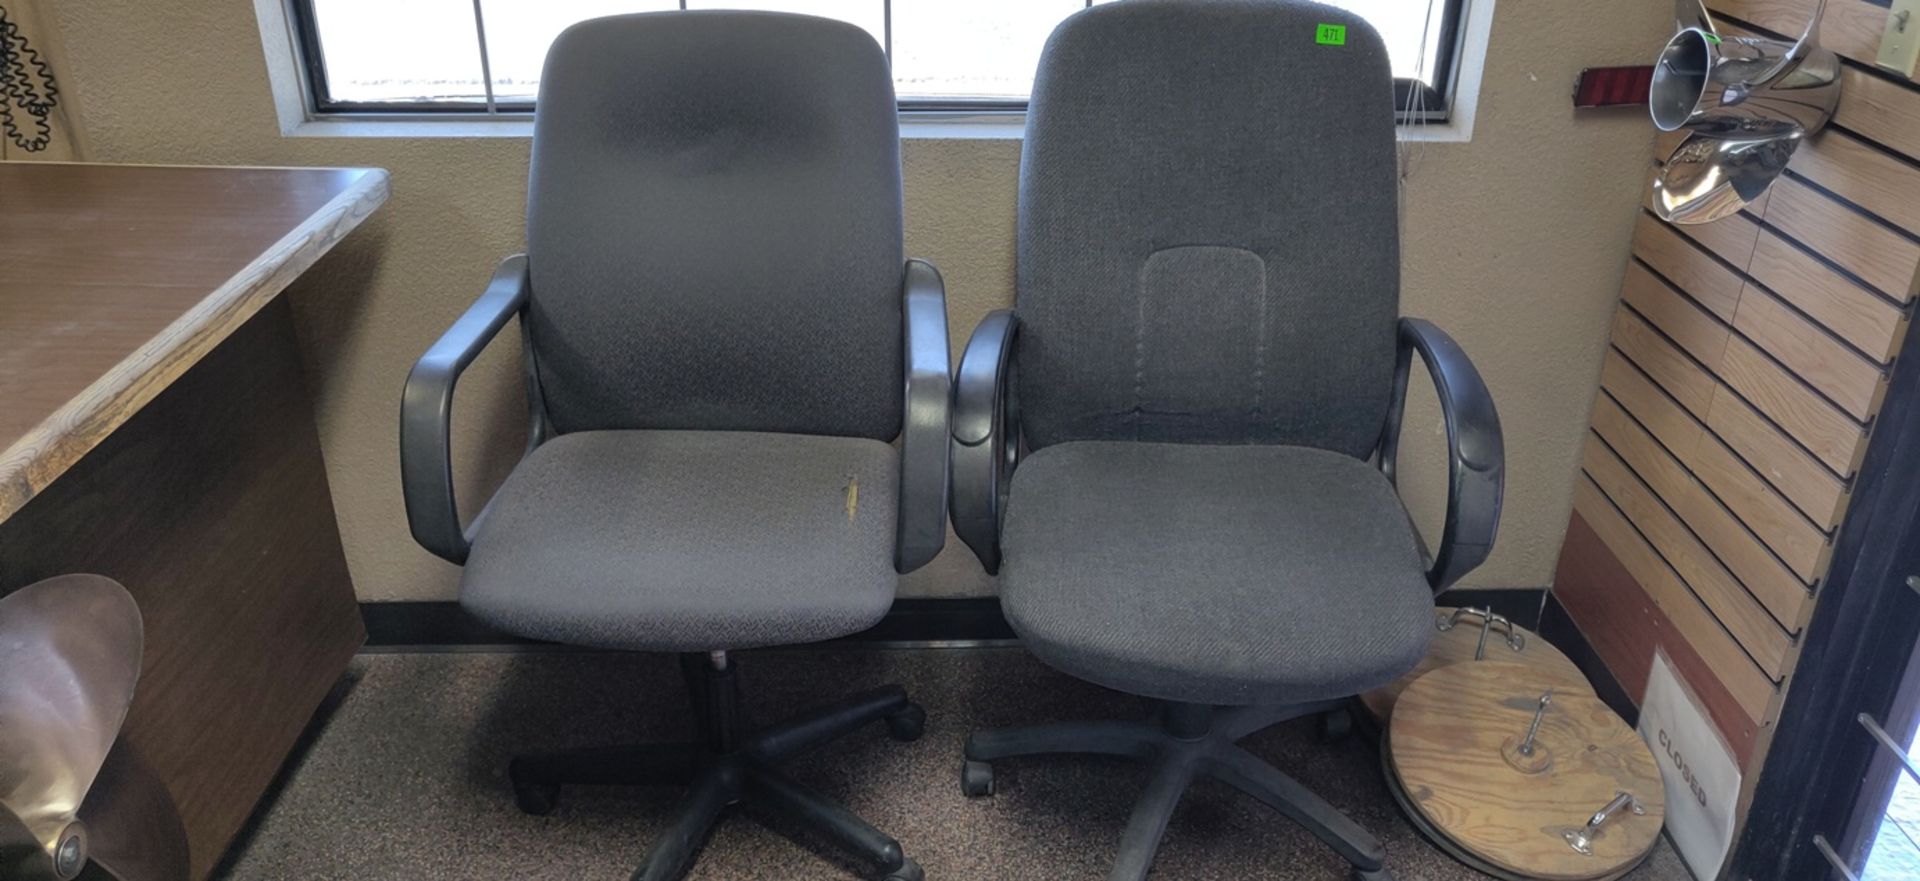 OFFICE CHAIRS W/ ARM REST (QUANTITY X YOUR BID) - Image 5 of 11